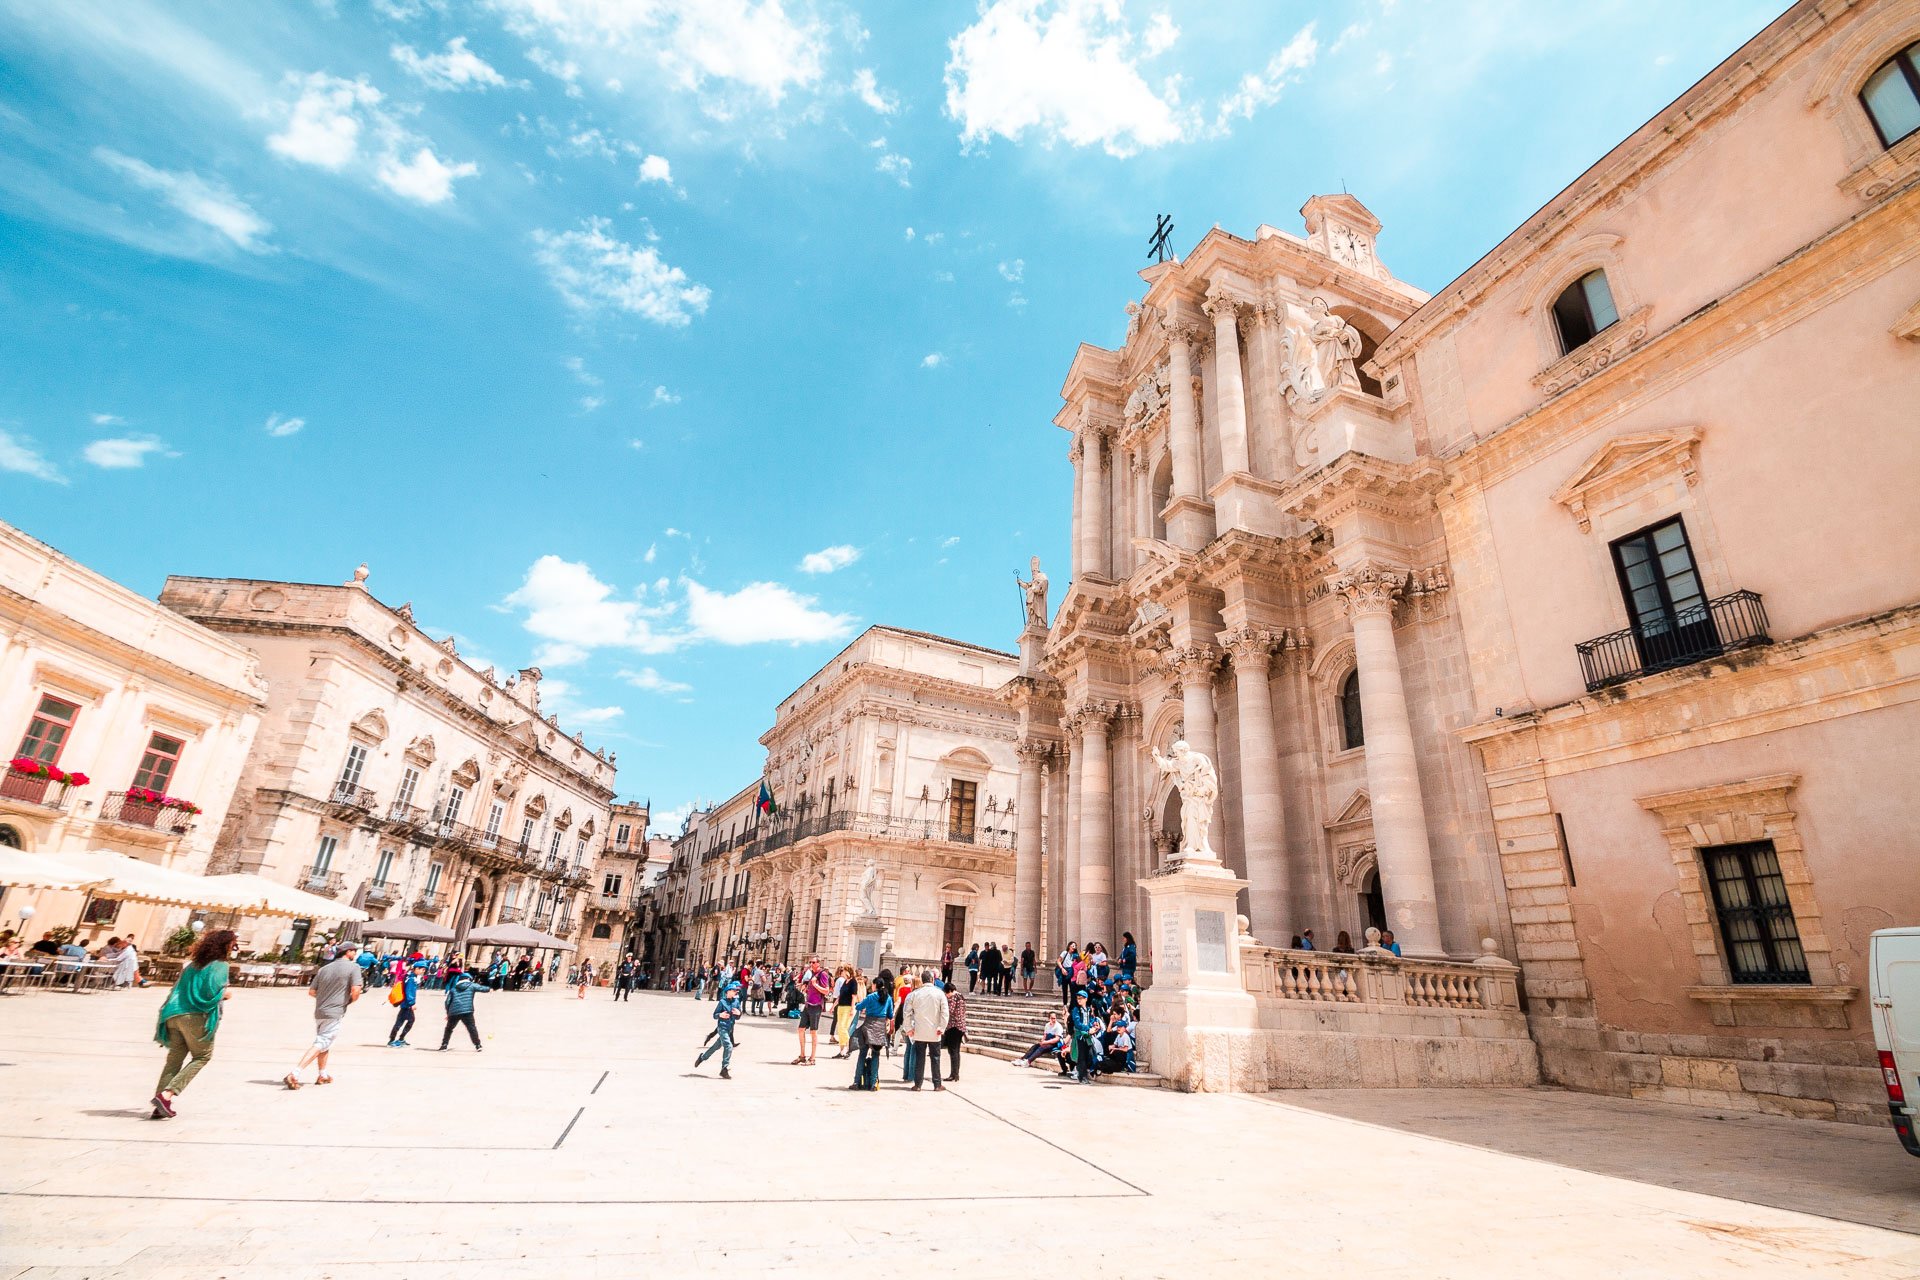 This image shows Piazza Duomo in Siracusa, Sicily, on a sunny day. There are people walking around the square. 